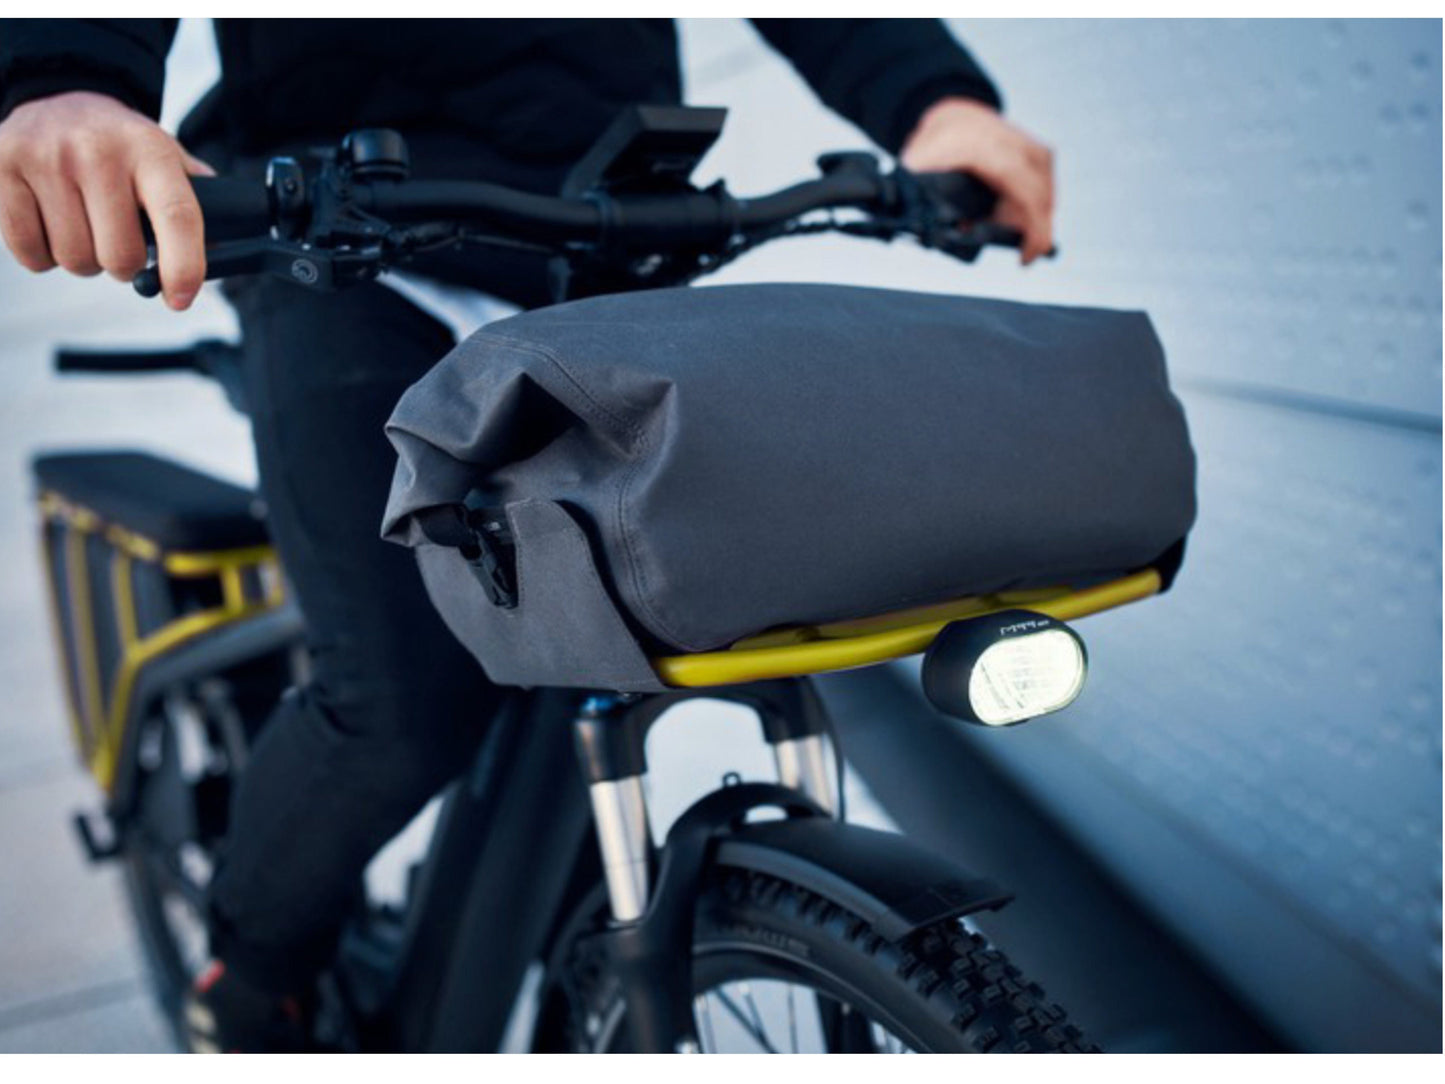 Riese and Muller Multicharger GT Touring 750 emtb hardtail close up front carrier bag option headlight